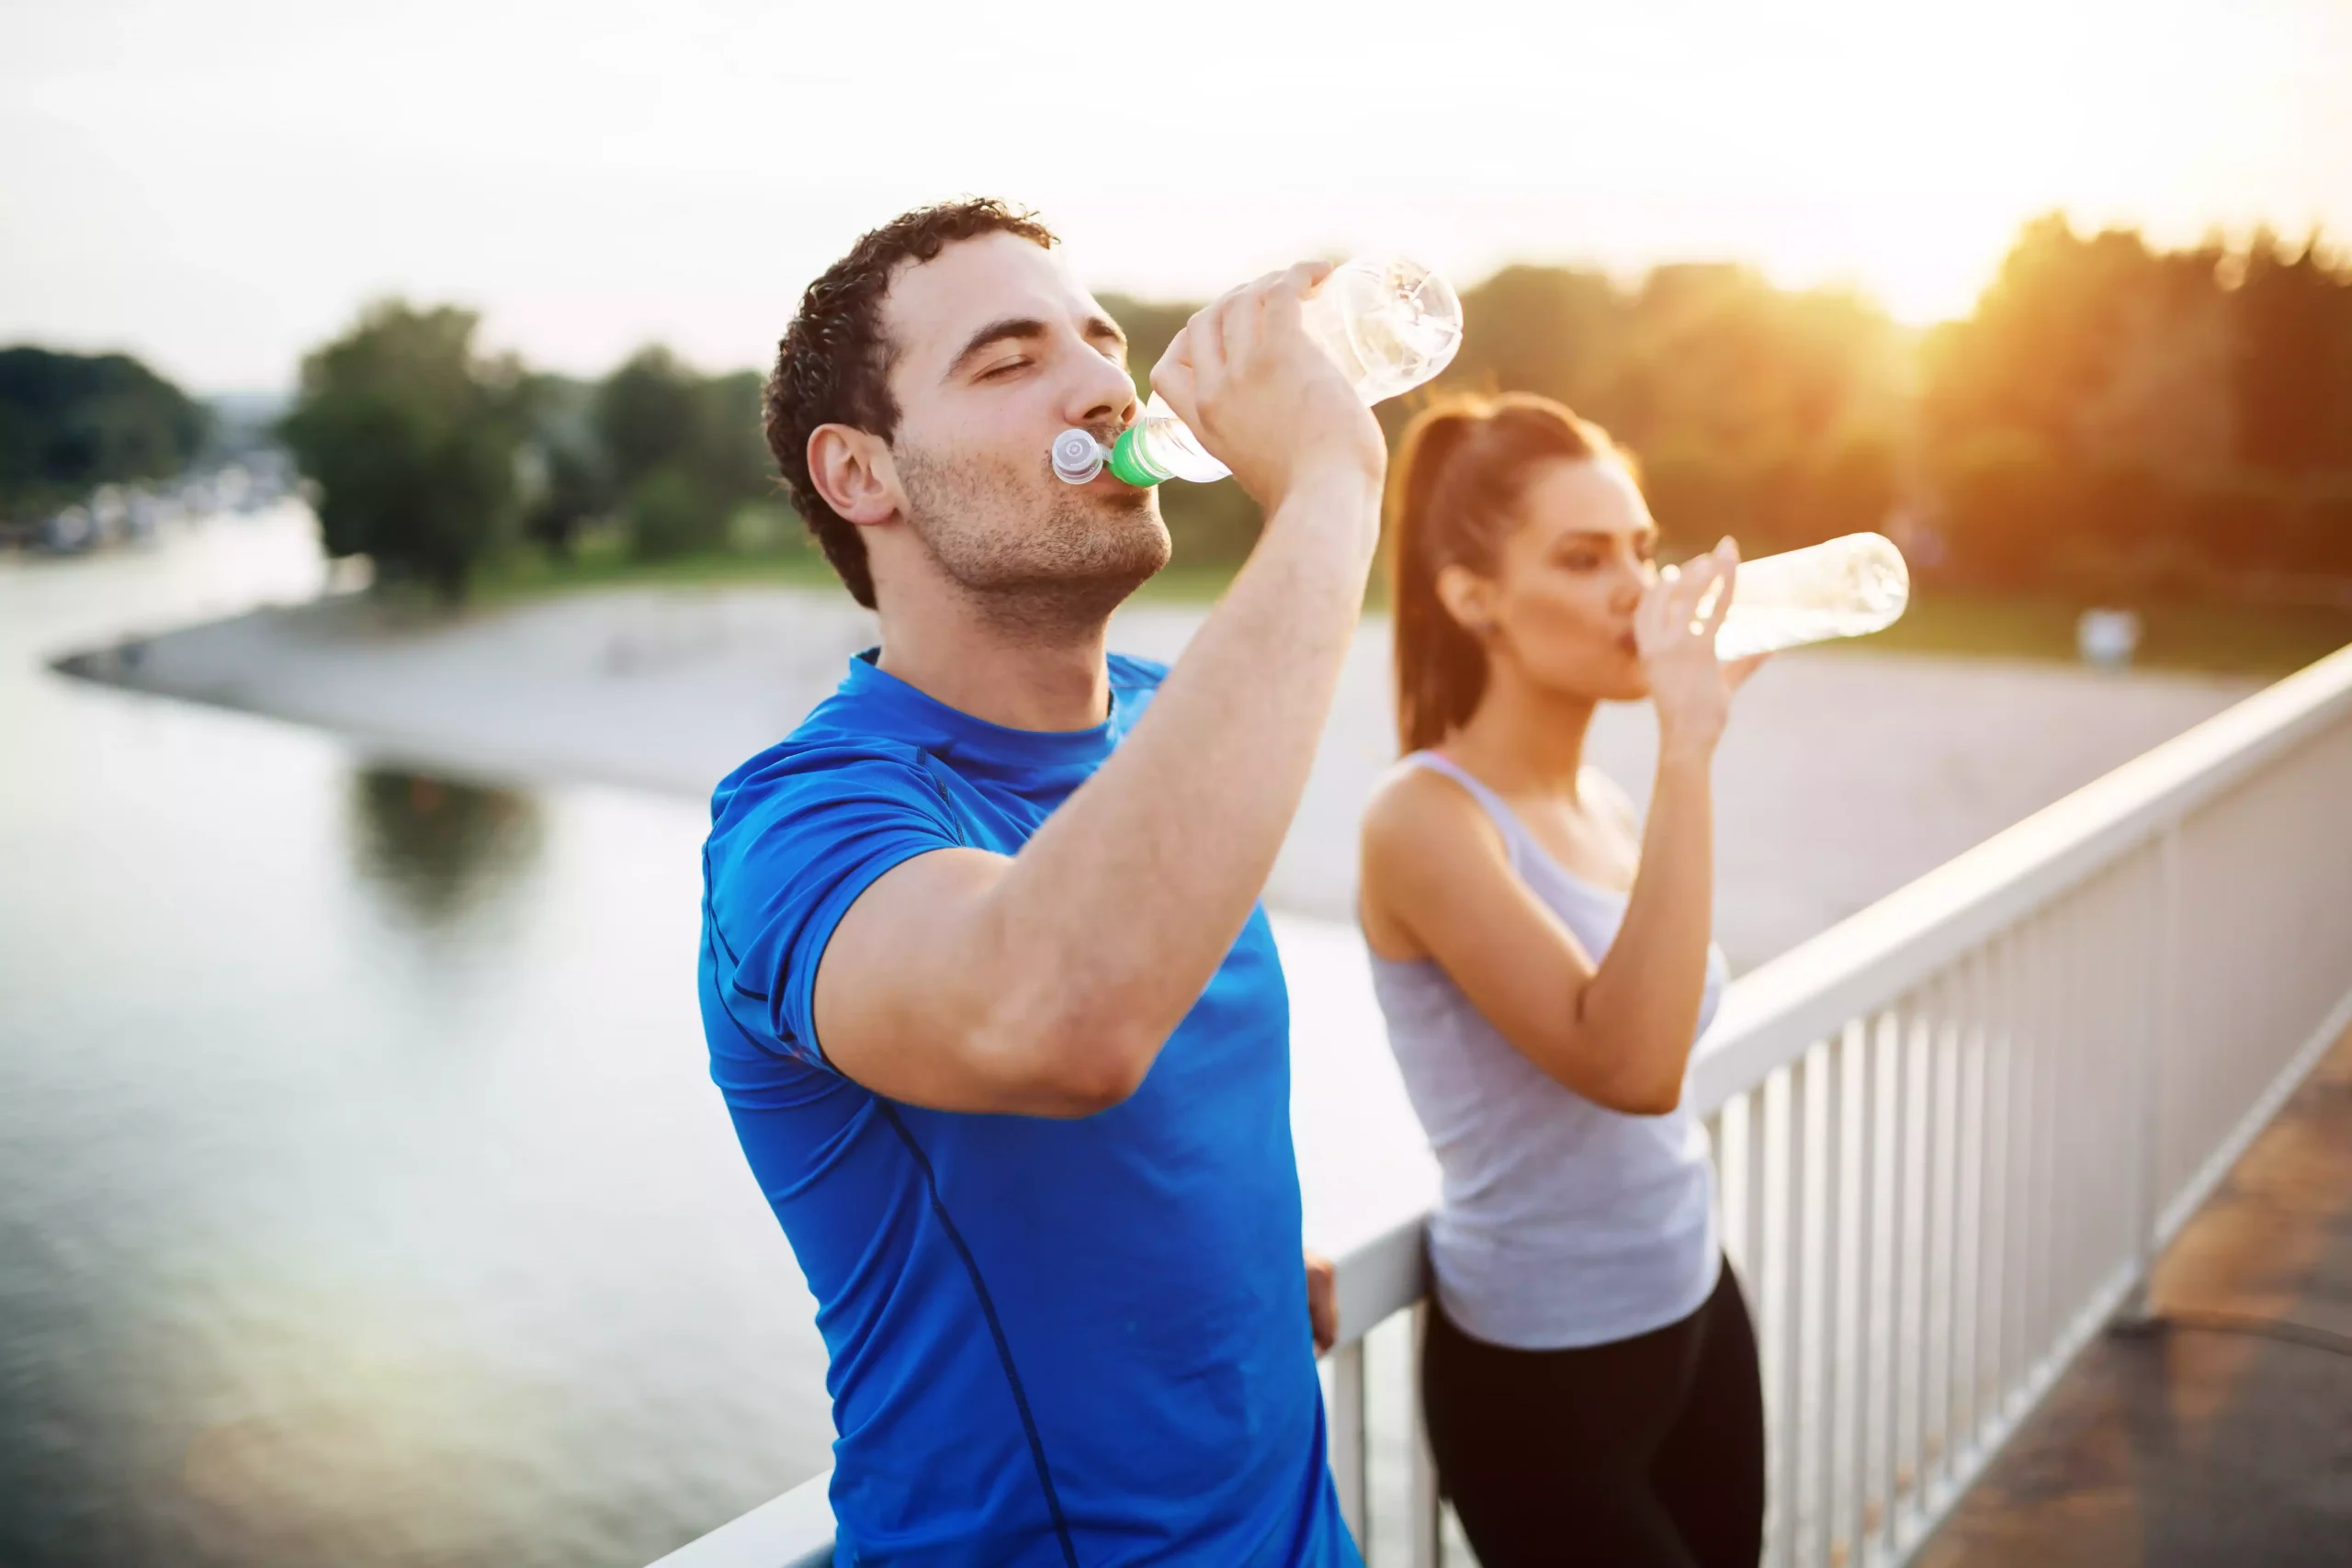 signs to look for dehydration and heat exhaustion